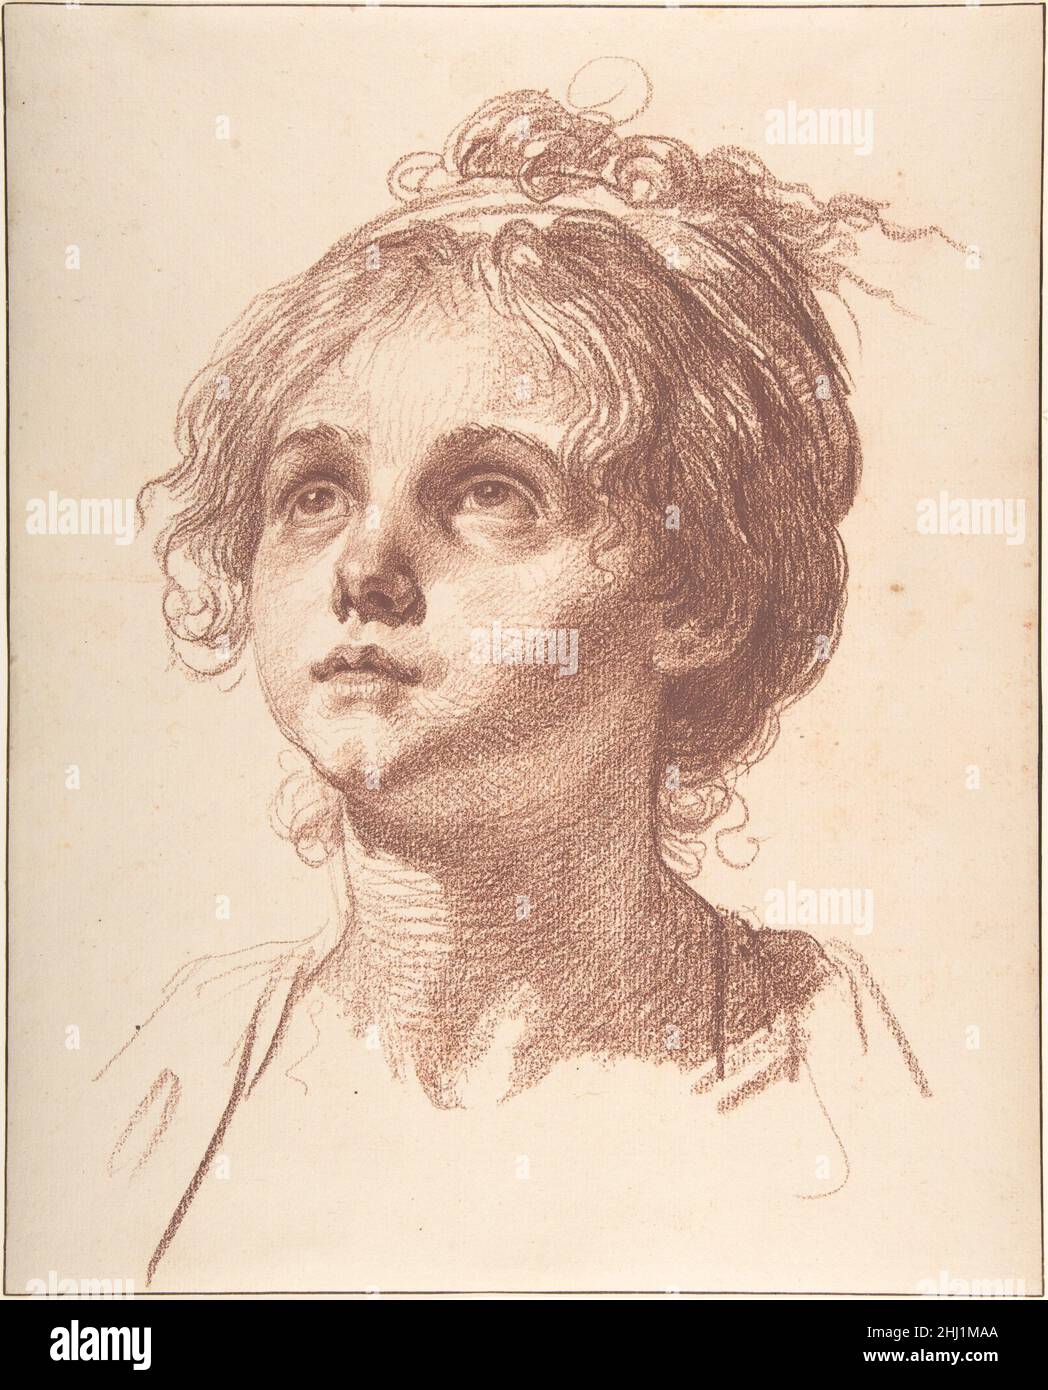 Head of a Girl Looking Up n.d. Jean-Baptiste Greuze French Published in 1762, the treatise Emile, or On Education by the philosopher Jean-Jacques Rousseau (1712–1778) transformed educational theory and shaped a new image of childhood defined by innocence and virtue. This theme was quickly taken up by artists such as the sculptor Jean Antoine Houdon, the portraitist Elisabeth Louise Vigée Le Brun, and the genre painter Jean-Baptiste Greuze. Further inspired by the philosopher Denis Diderot, who also believed that education was an important tool to moralize society, Greuze depicted several scene Stock Photo